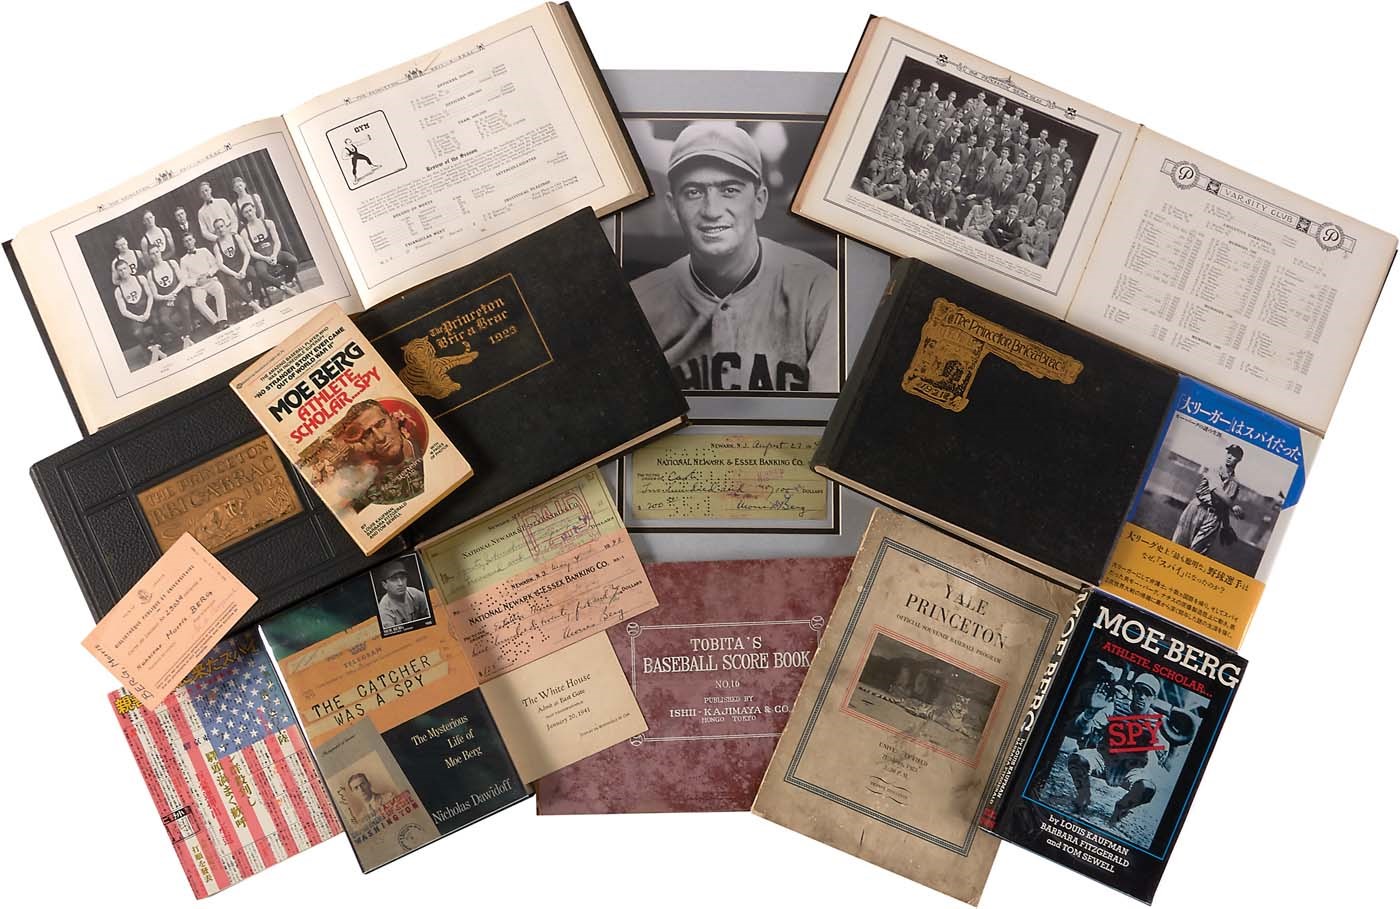 - Moe Berg Collection w/Autographs, Princeton Yearbooks & More (14)